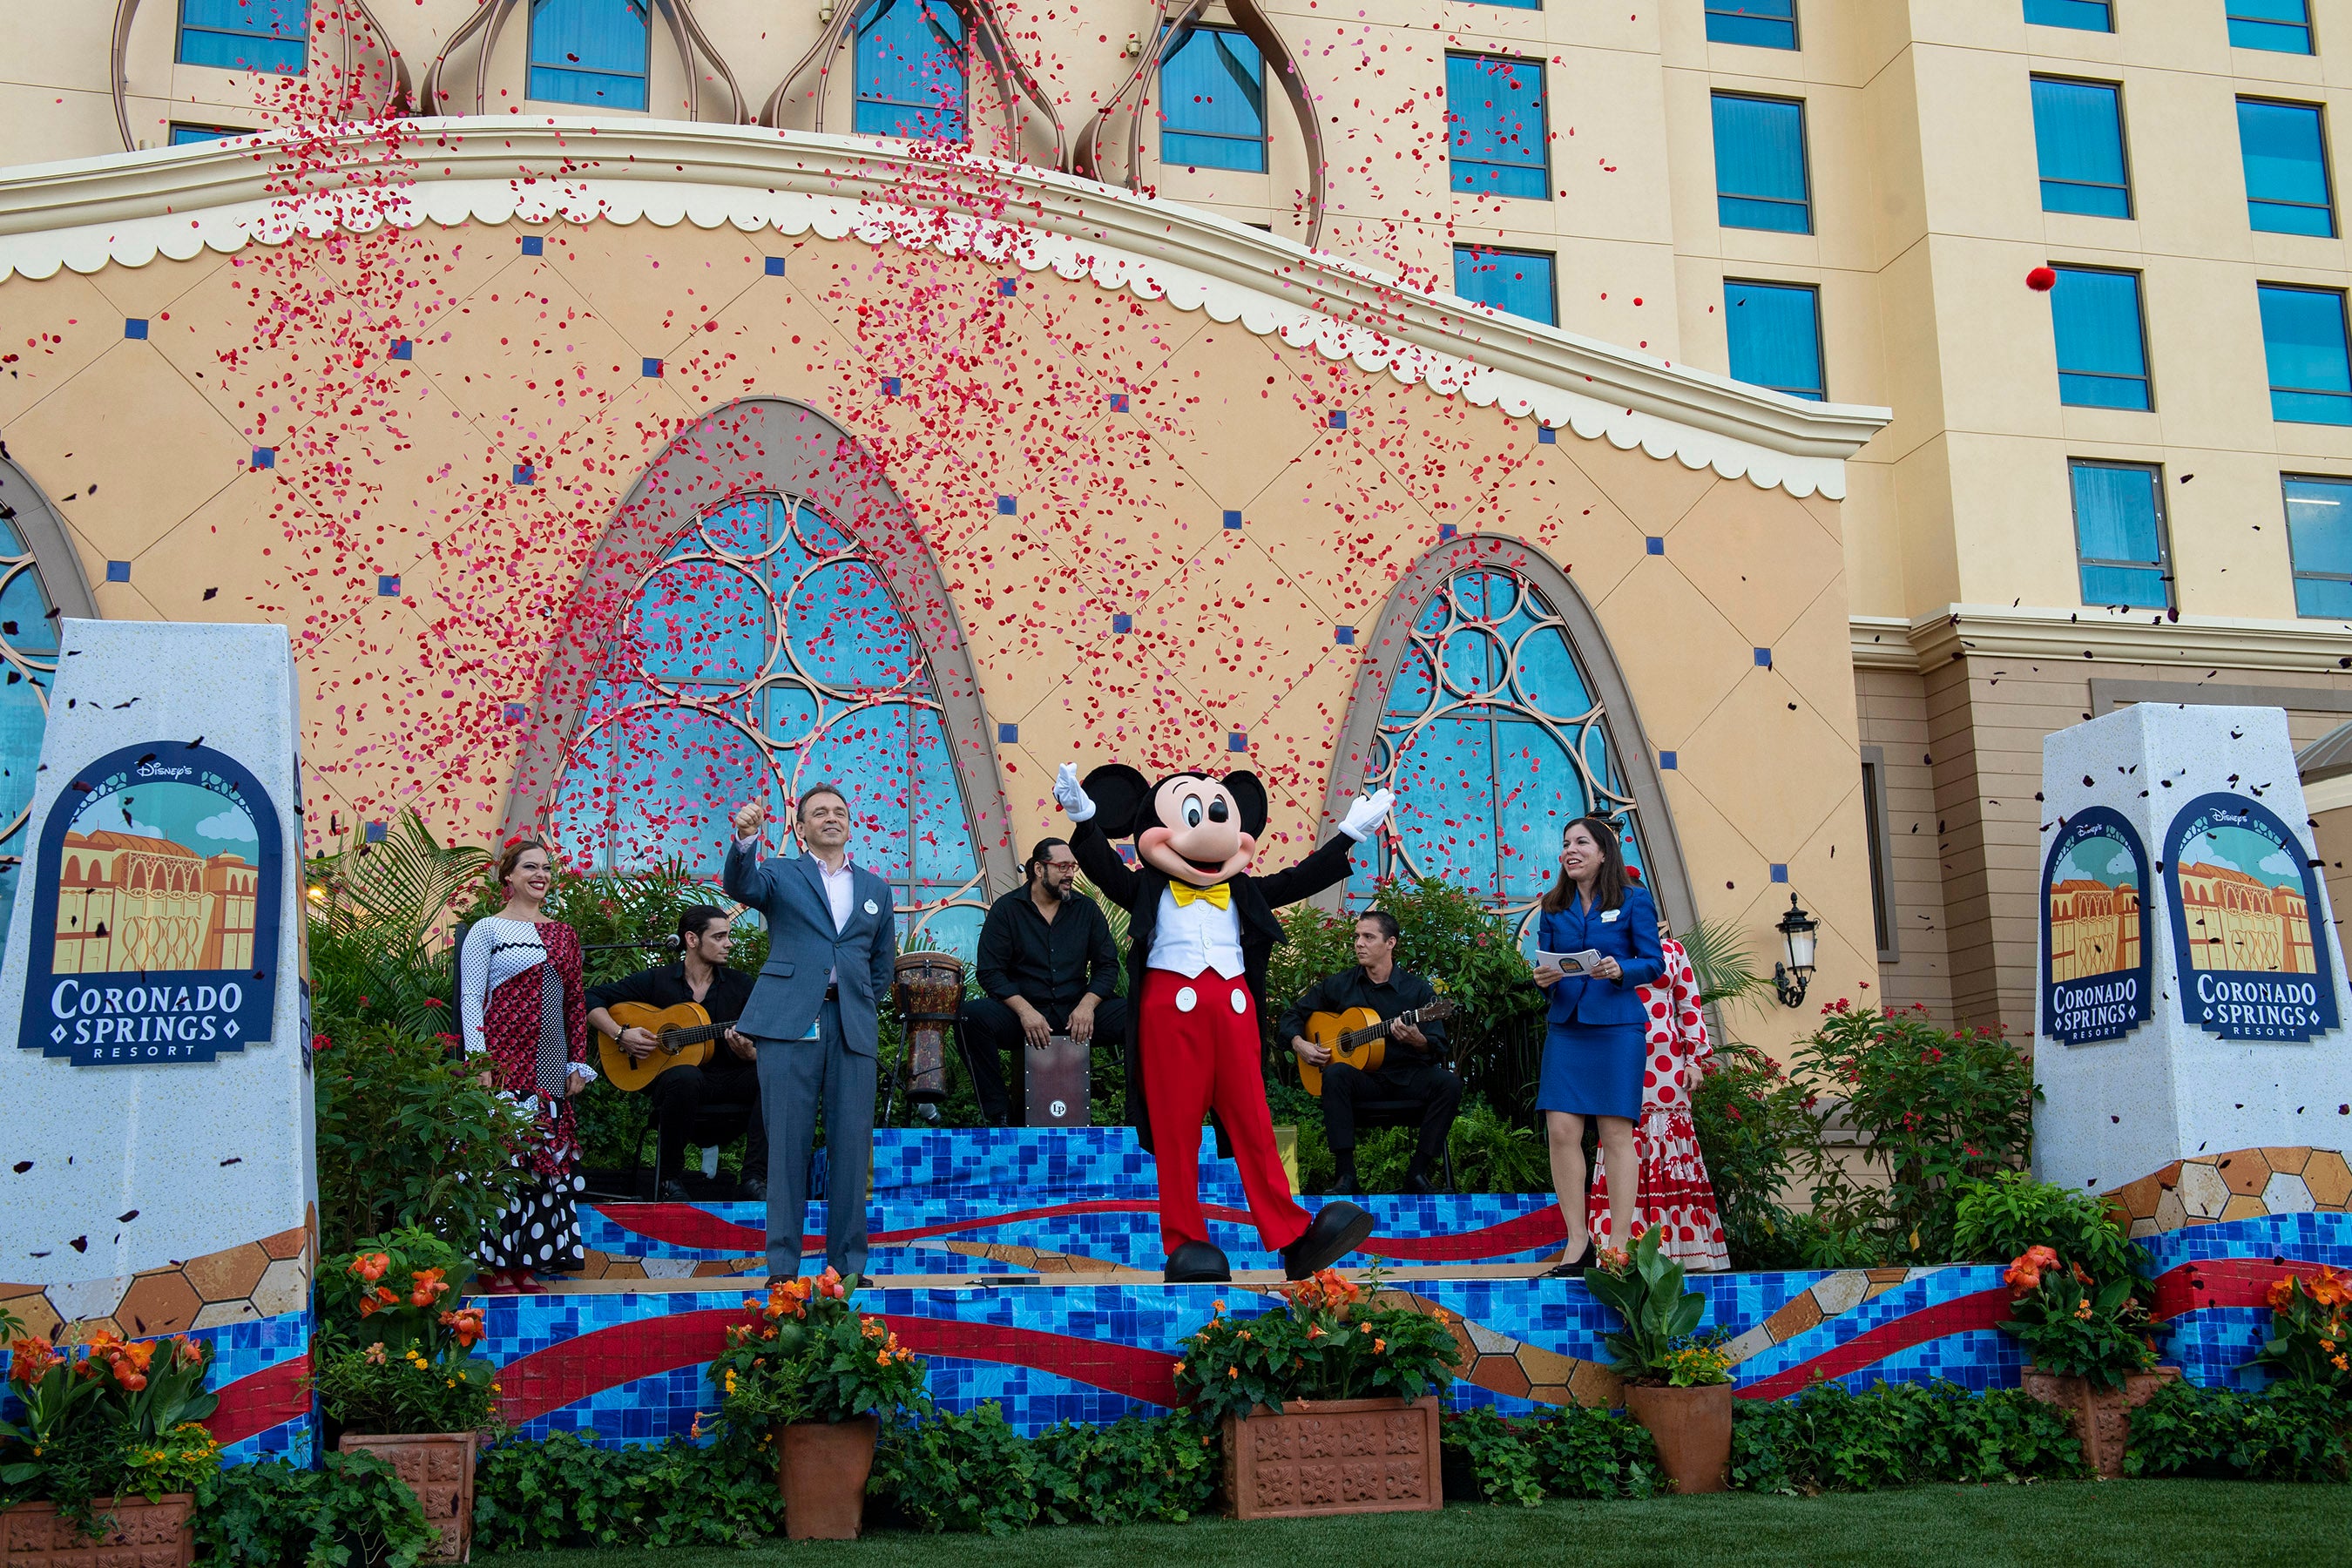 Walt Disney World Resort cast members celebrate the grand opening of the new Gran Destino Tower at Disney’s Coronado Springs Resort in Lake Buena Vista, Fla., July 9, 2019.  The opening of the tower also marks completion of a multiyear re-imagining of Disney’s Coronado Springs Resort, which offers new restaurants, recreational amenities, club-level services and a new arrival experience. (David Roark, photographer)